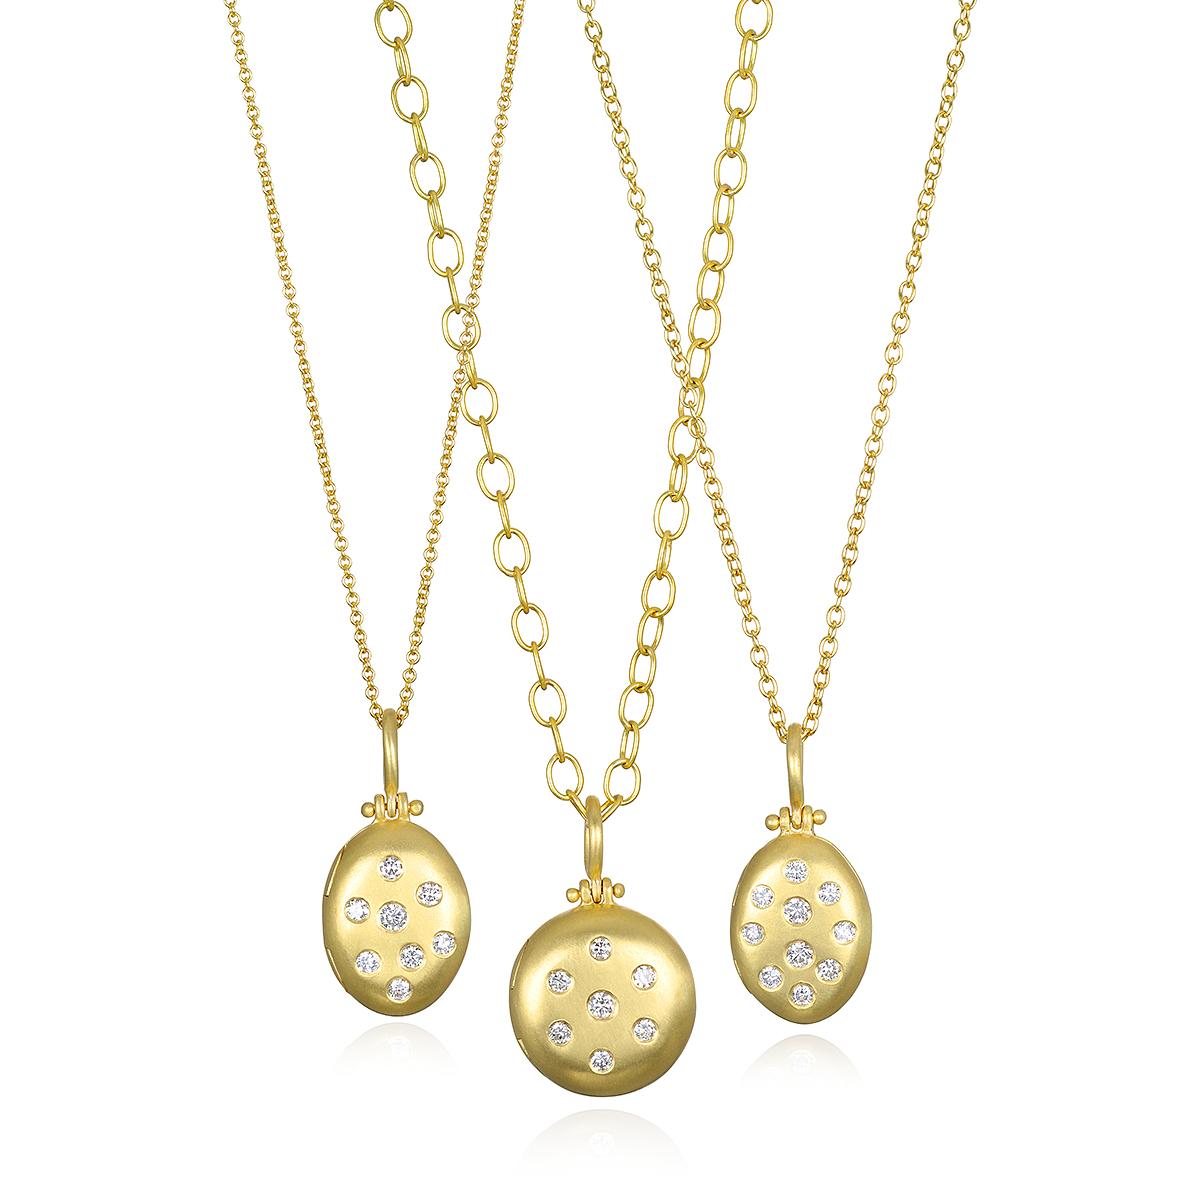 Faye Kim's 18 Karat Gold and Diamond Small Round Locket combines substance with style, and offers just the right amount of sparkle. Finely handcrafted and matte-finished, this locket can be personalized with an engraving, and layered with other